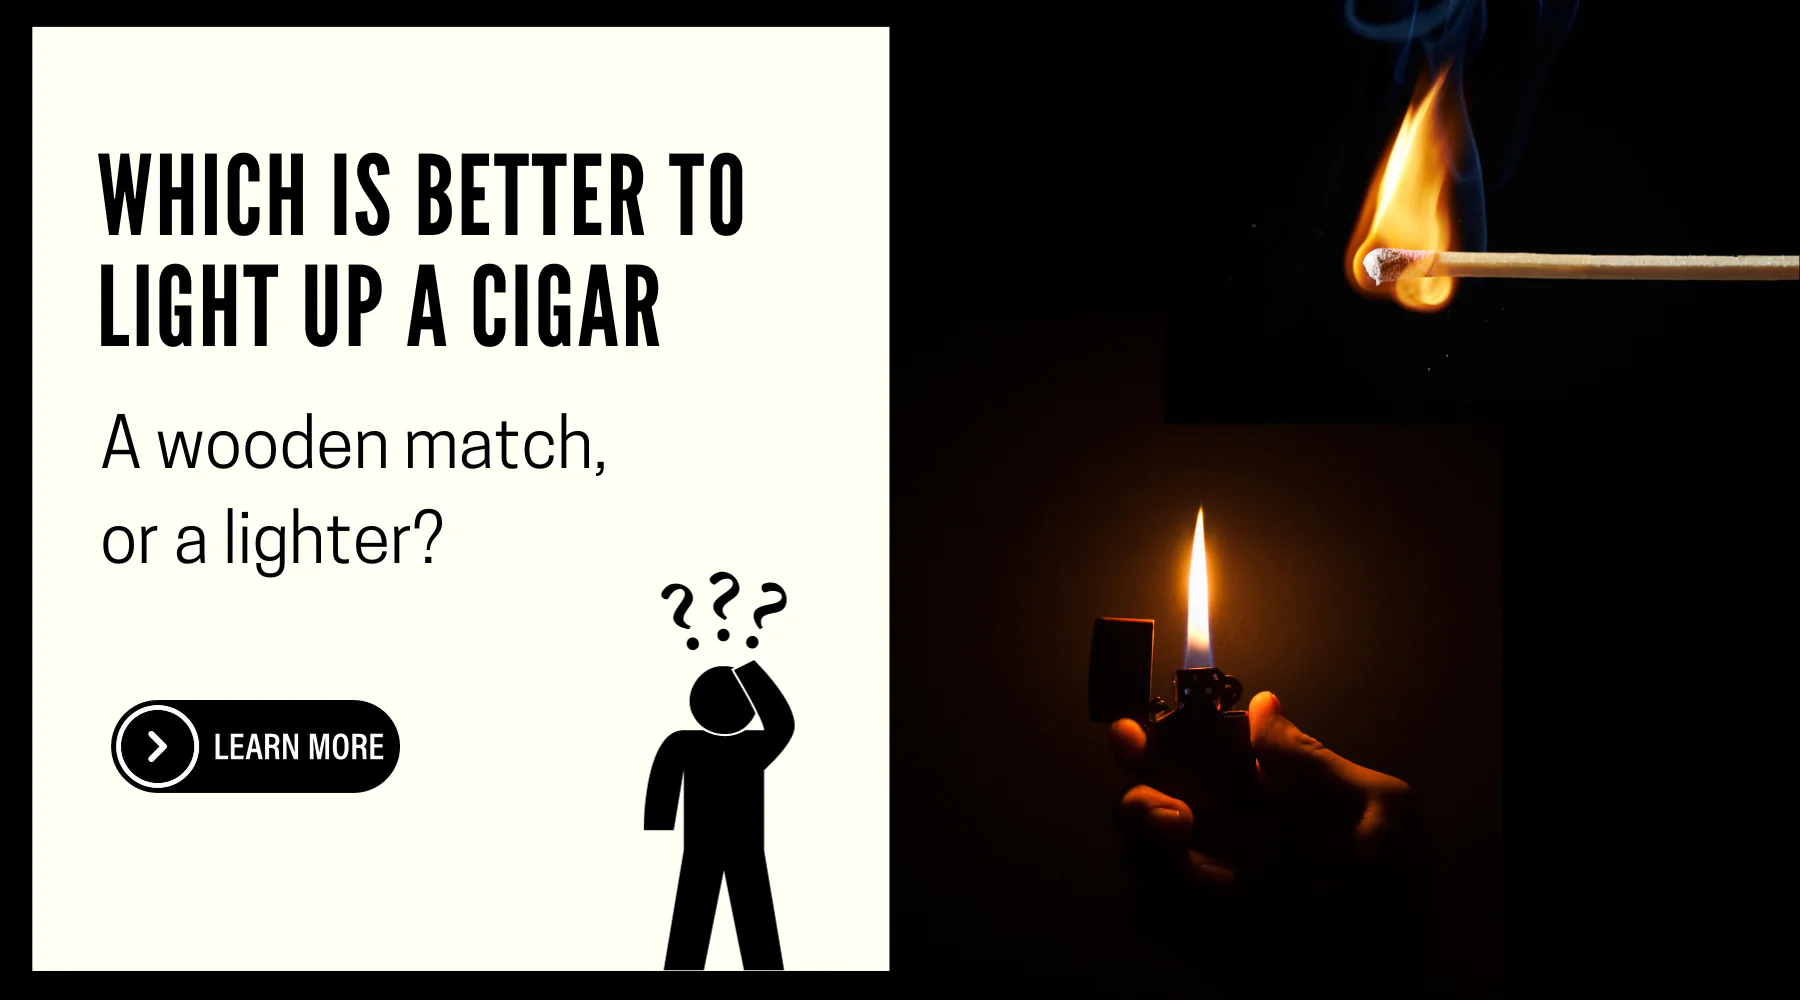 Which is better to light up a cigar, a wooden match, or a lighter?